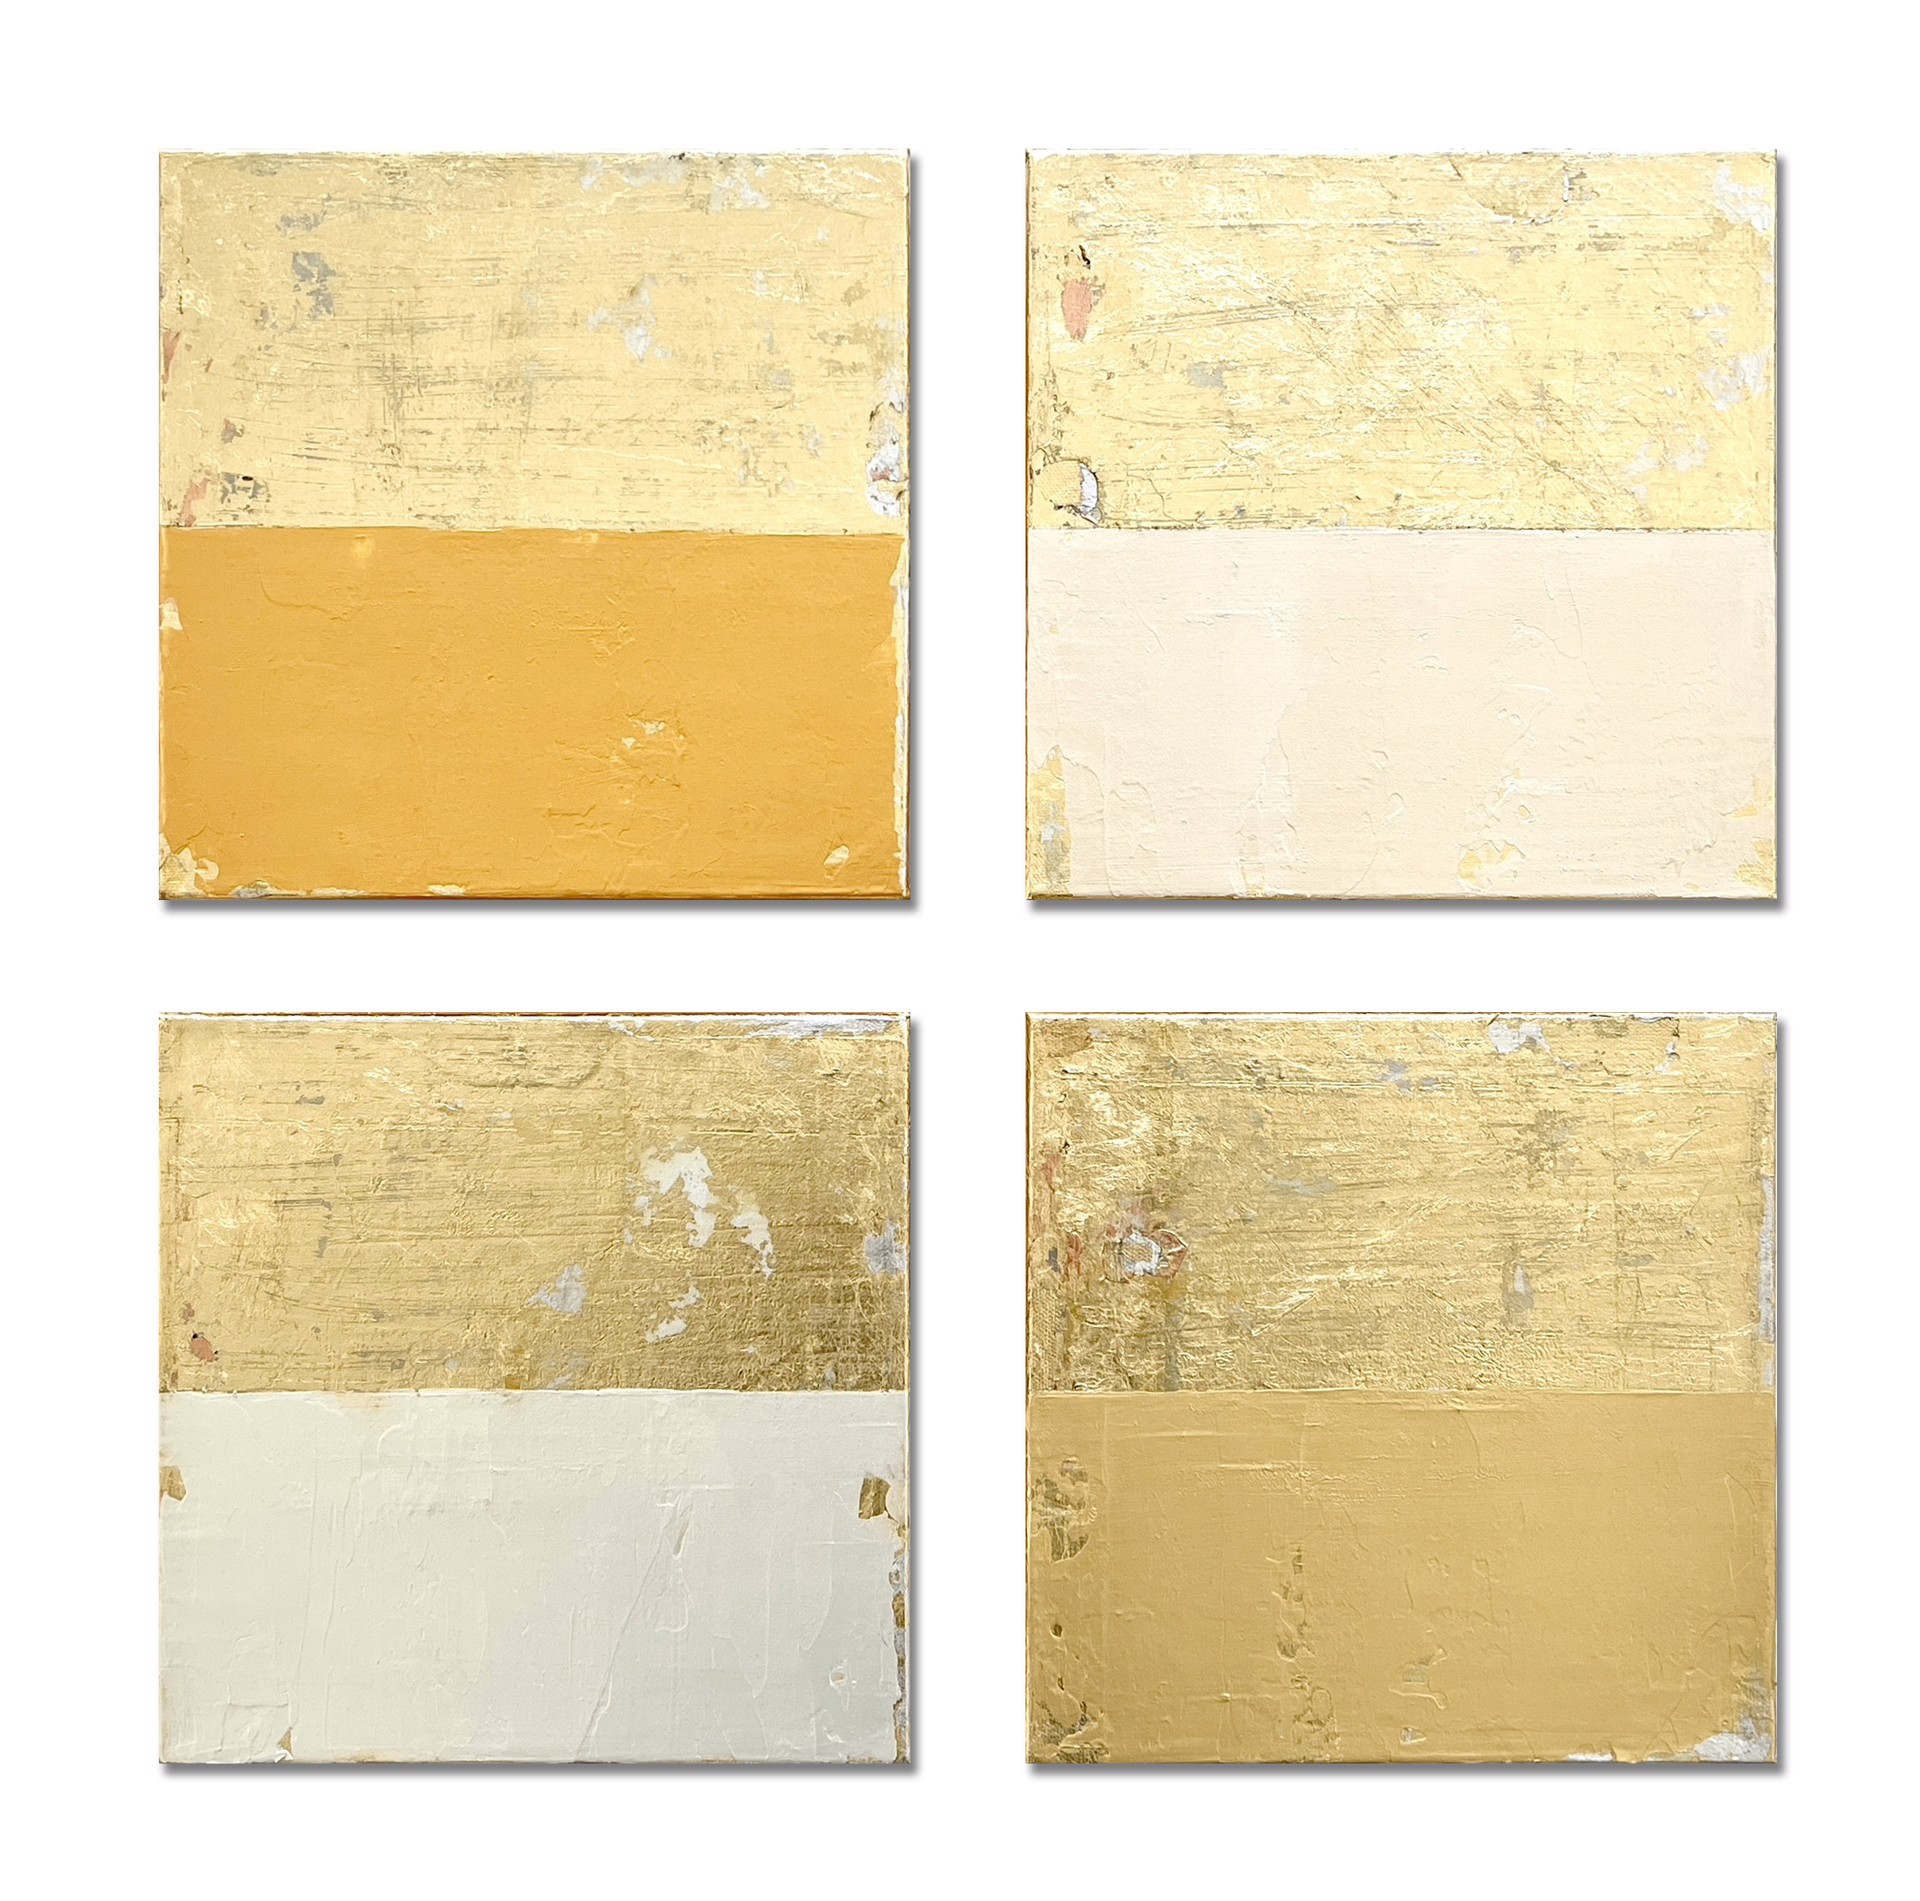 Gold And Gold (SS050 SS051 SS052 SS053) is a set of 4 multiple gold leaf mixed media panels from Japanese painter and artist Takefumi Hori.